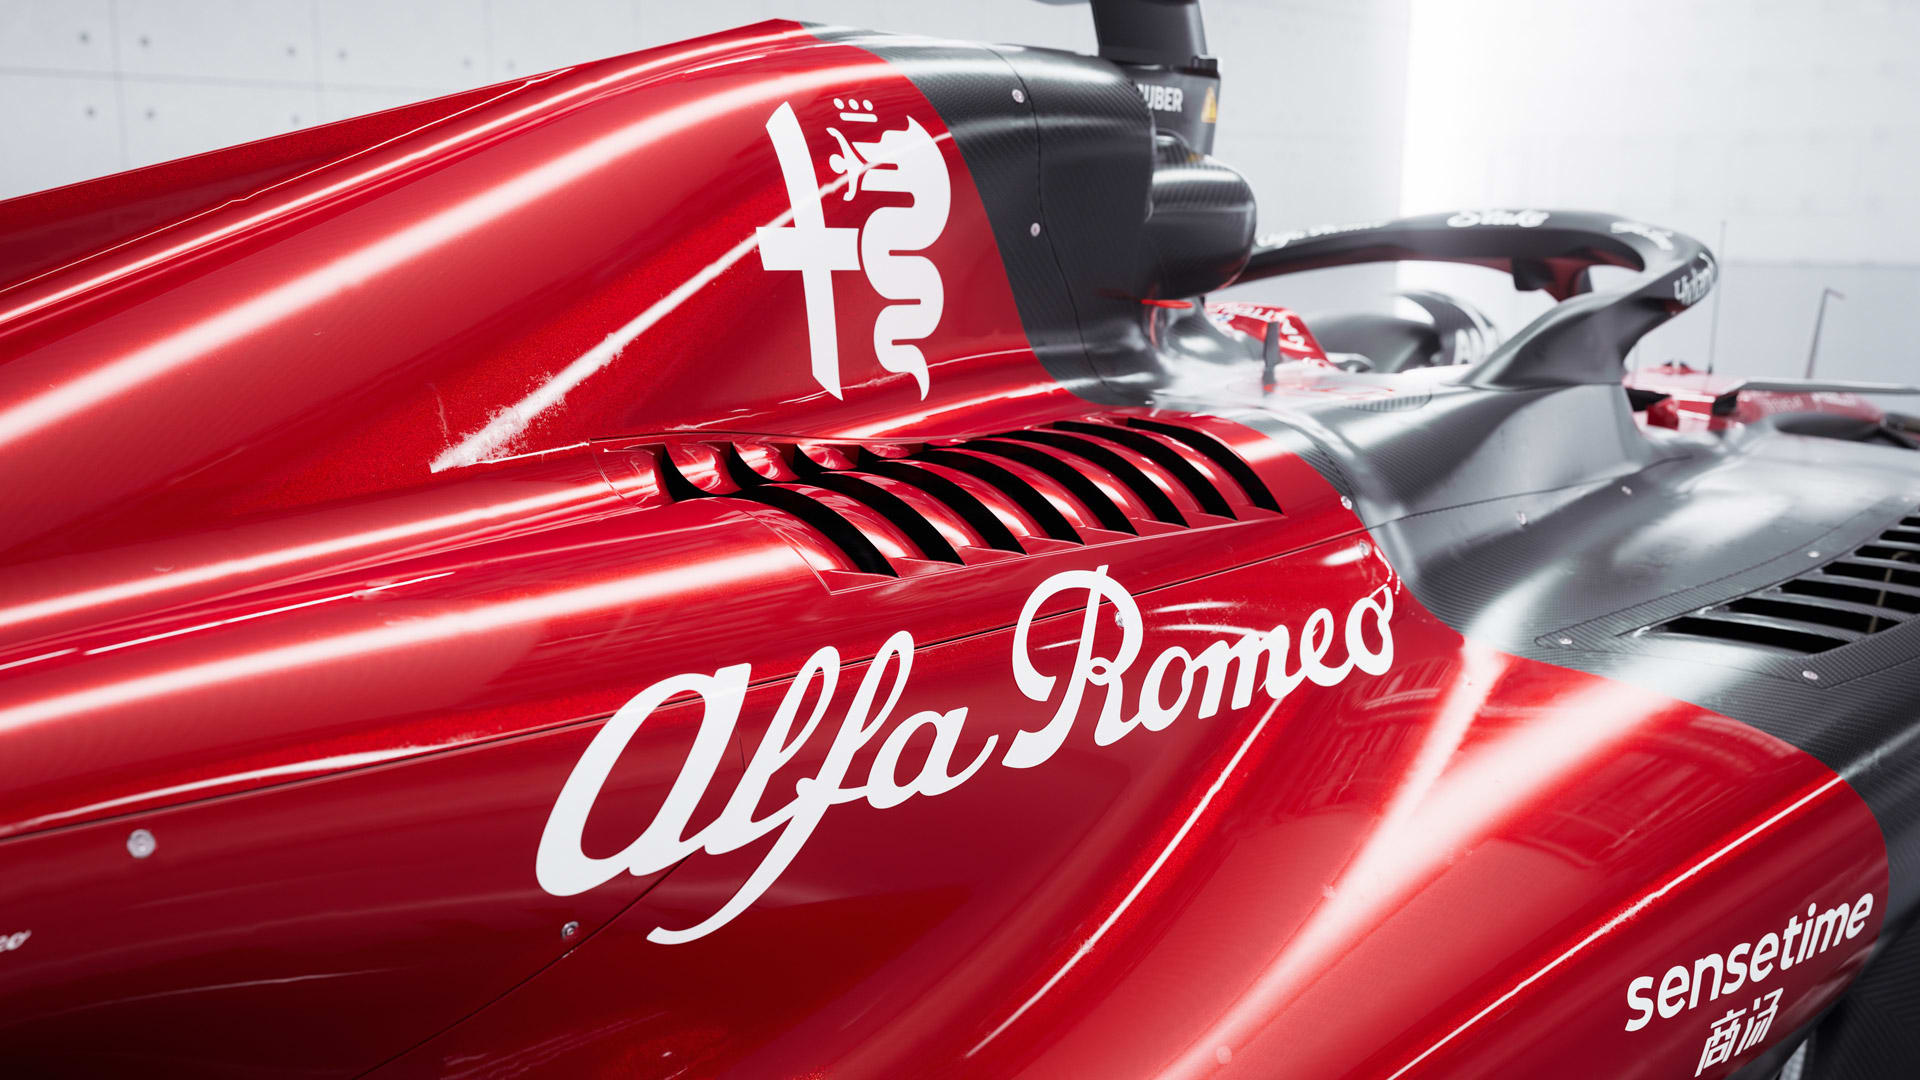 What changes have Alfa Romeo made to their 2023 car? We take a look! #F1 ... Tweet From Marvel